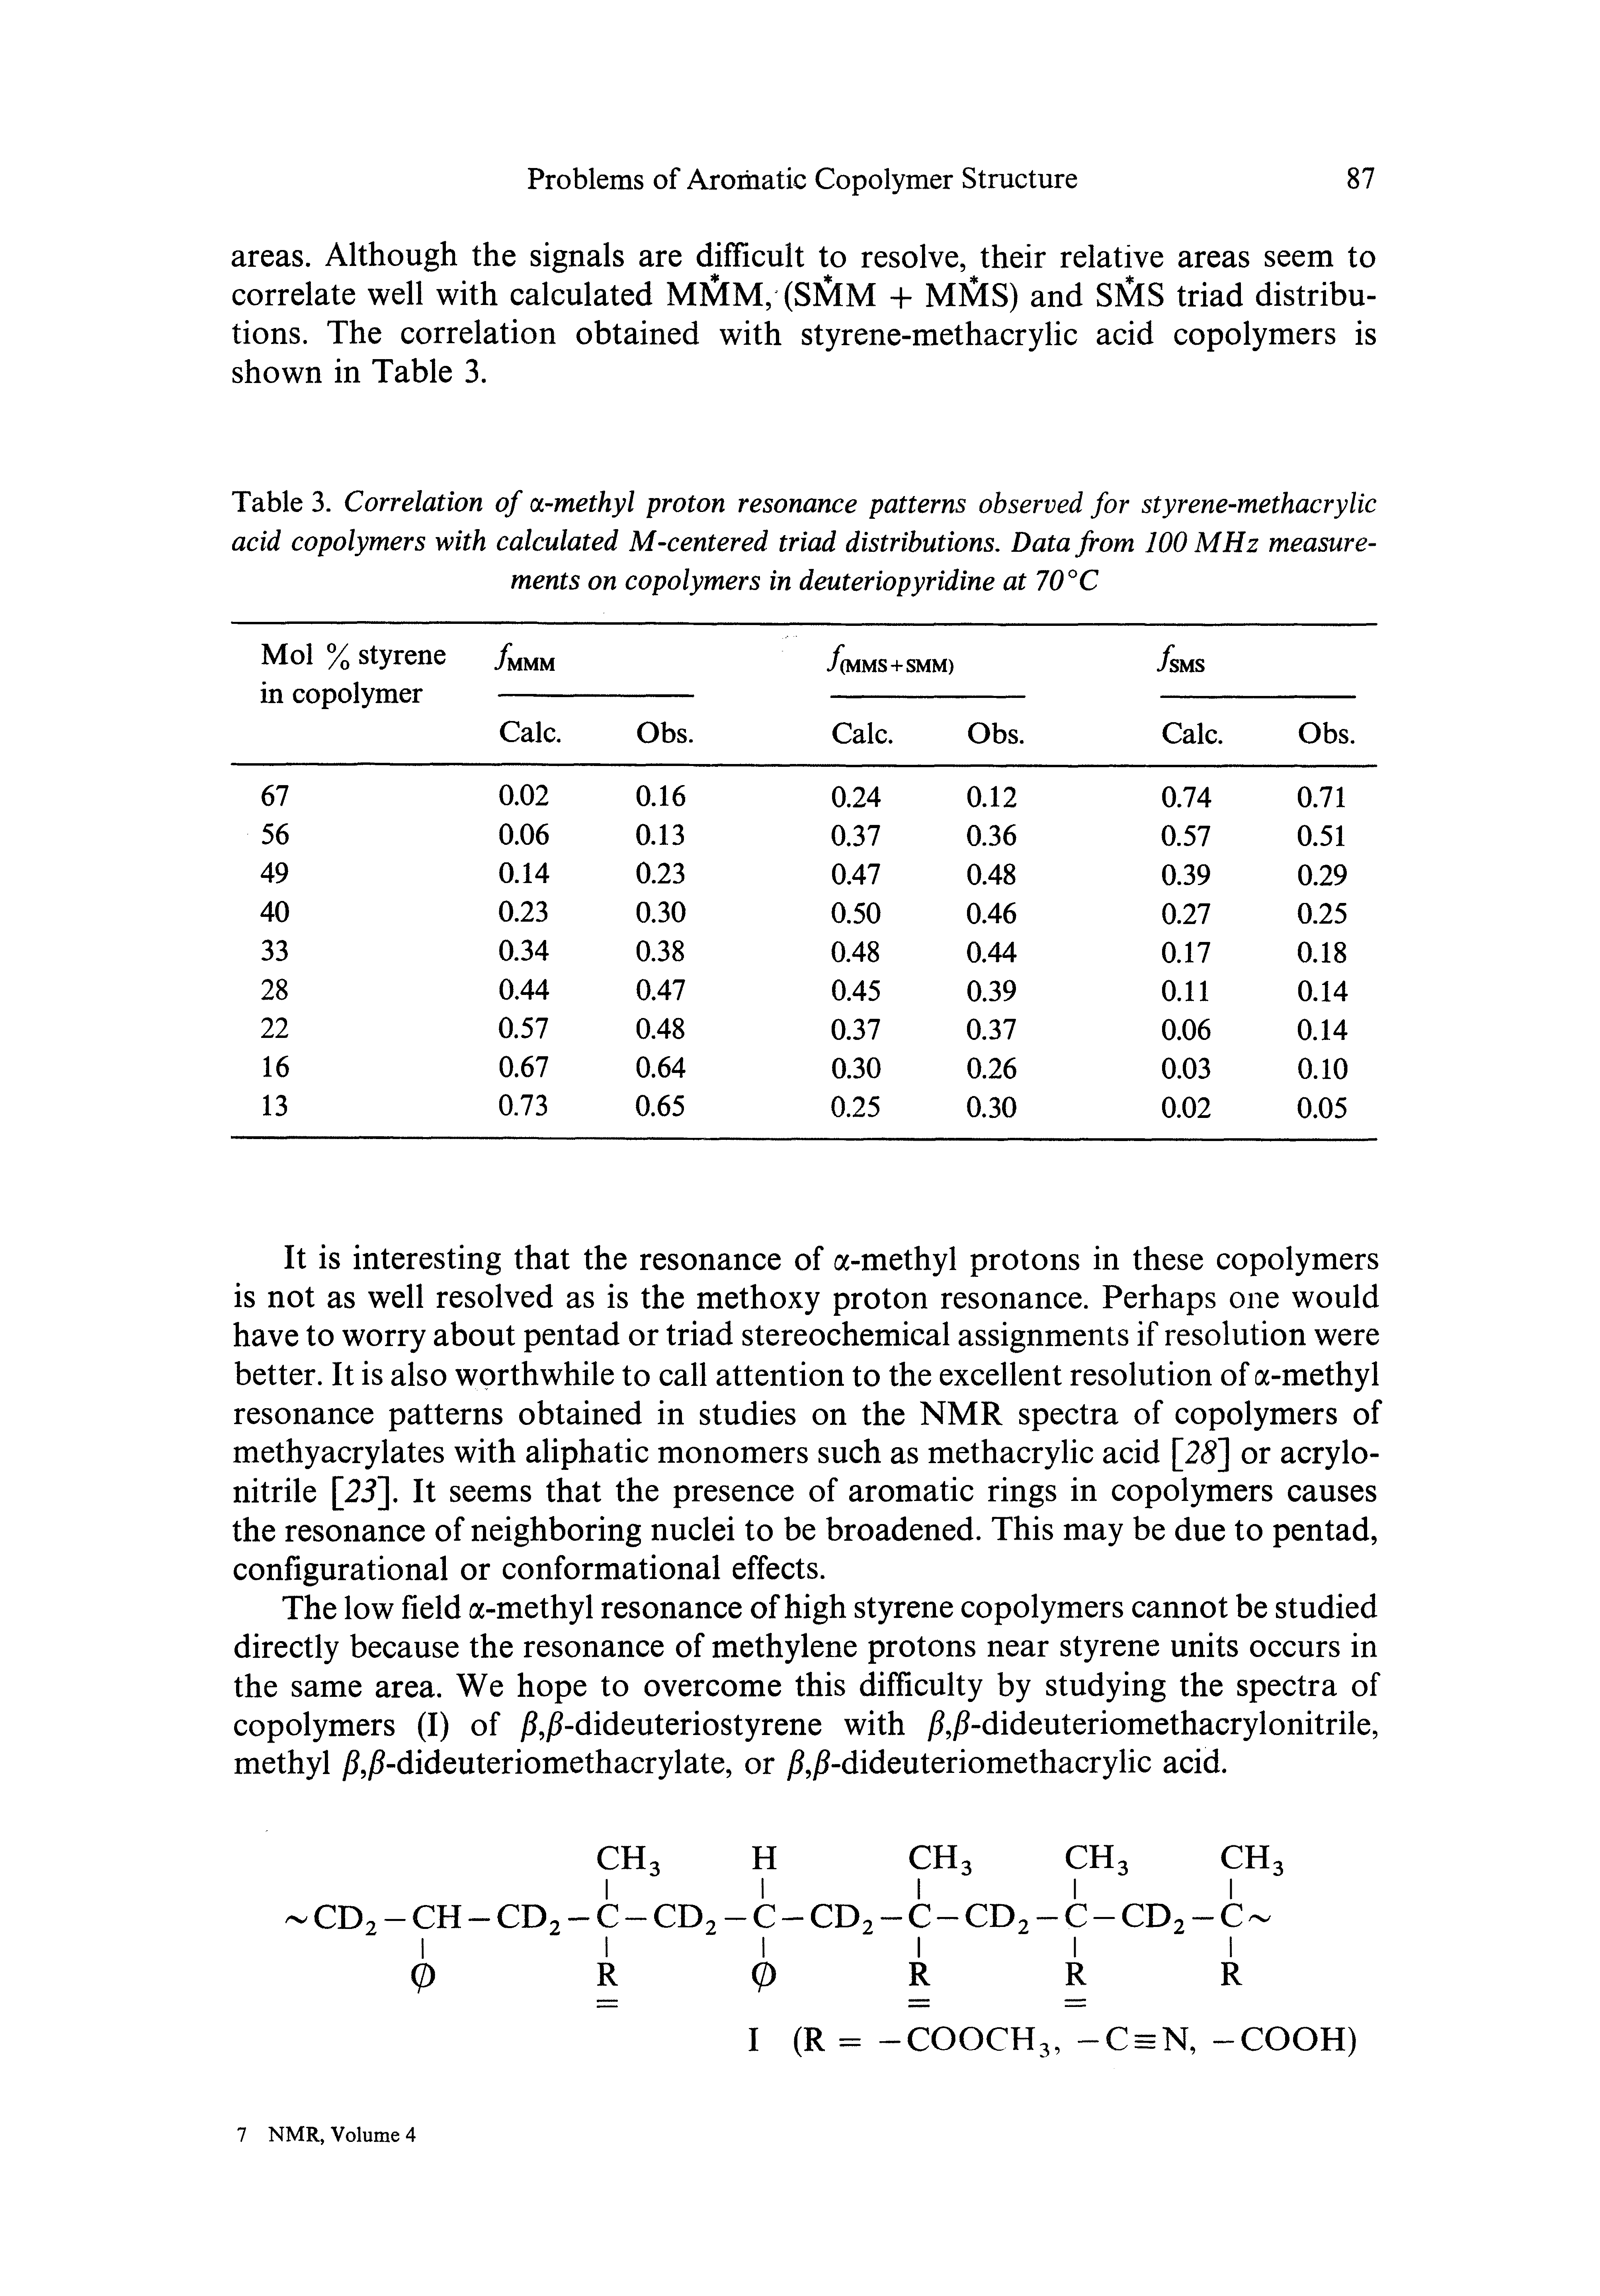 Table 3. Correlation of ct-methyl proton resonance patterns observed for styrene-methacrylic acid copolymers with calculated M-centered triad distributions. Data from 100 MHz measurements on copolymers in deuteriopyridine at 70°C...